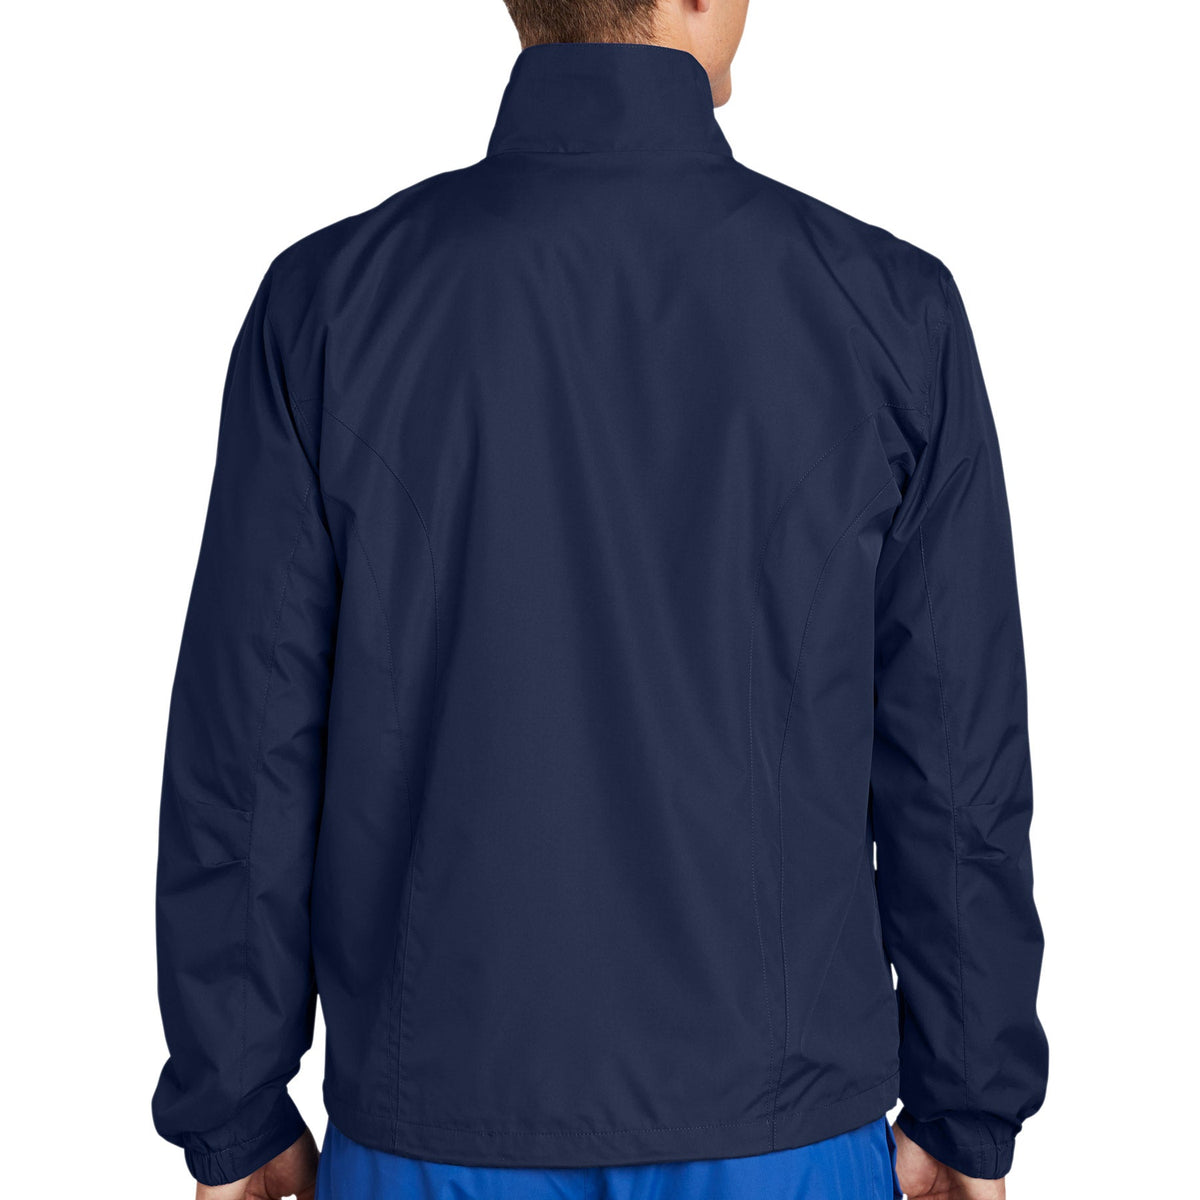 Get latest Rhino Rugby Full Zip Wind Jacket at best price.